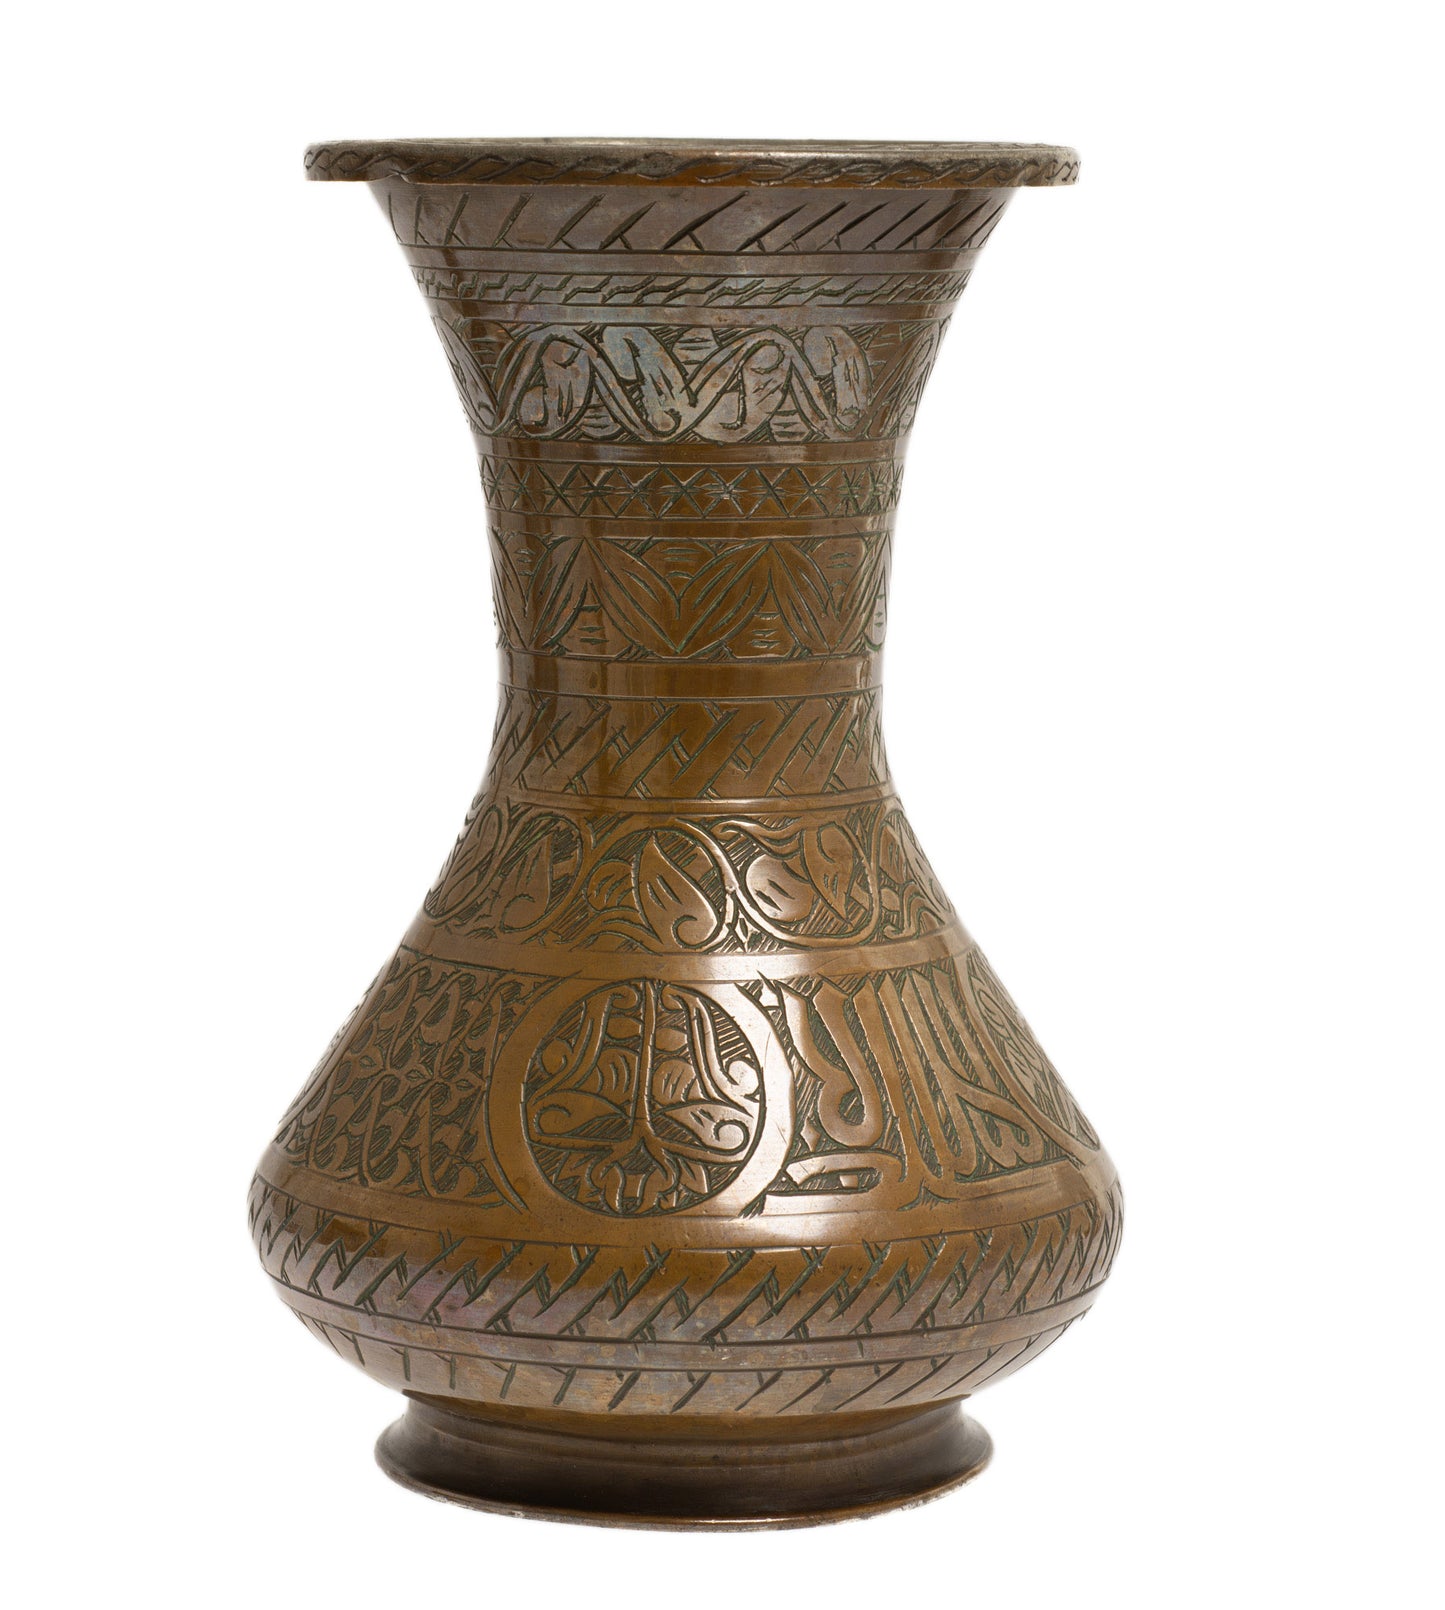 Antique/Vintage Middle Eastern Copper Vase with Islamic Script & Patterns (Code 2728)